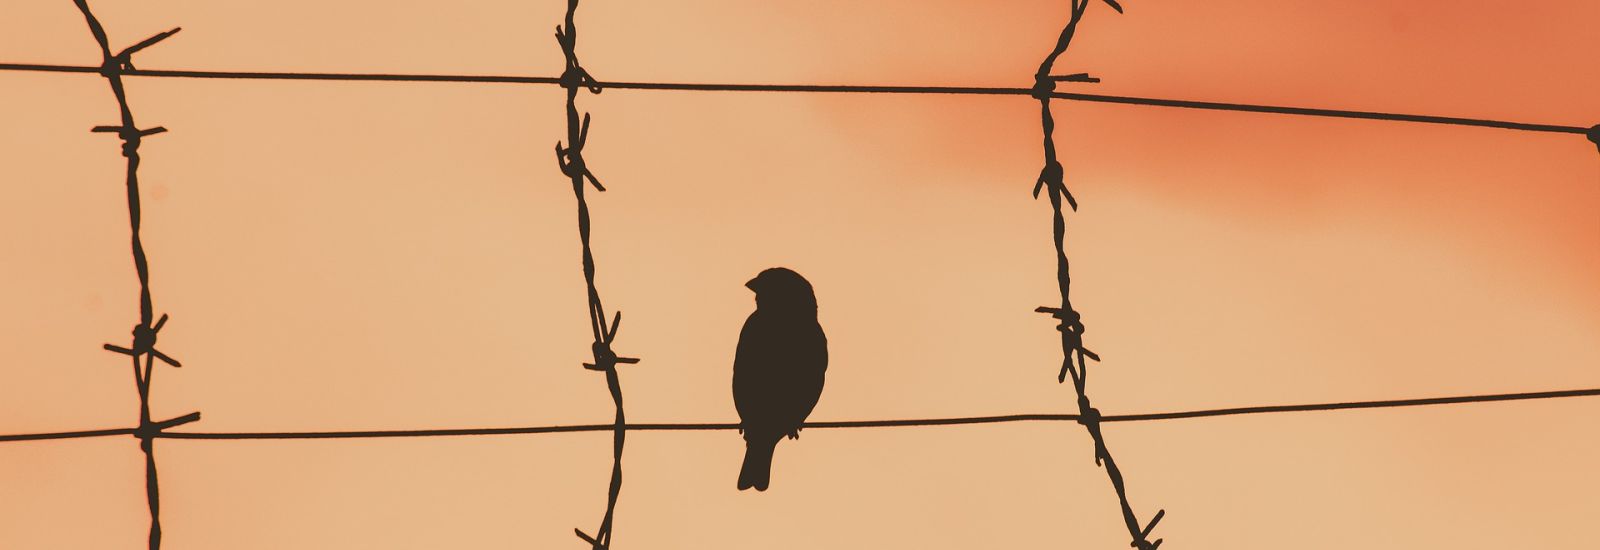 small bird on barbed wire fence with red sky behind